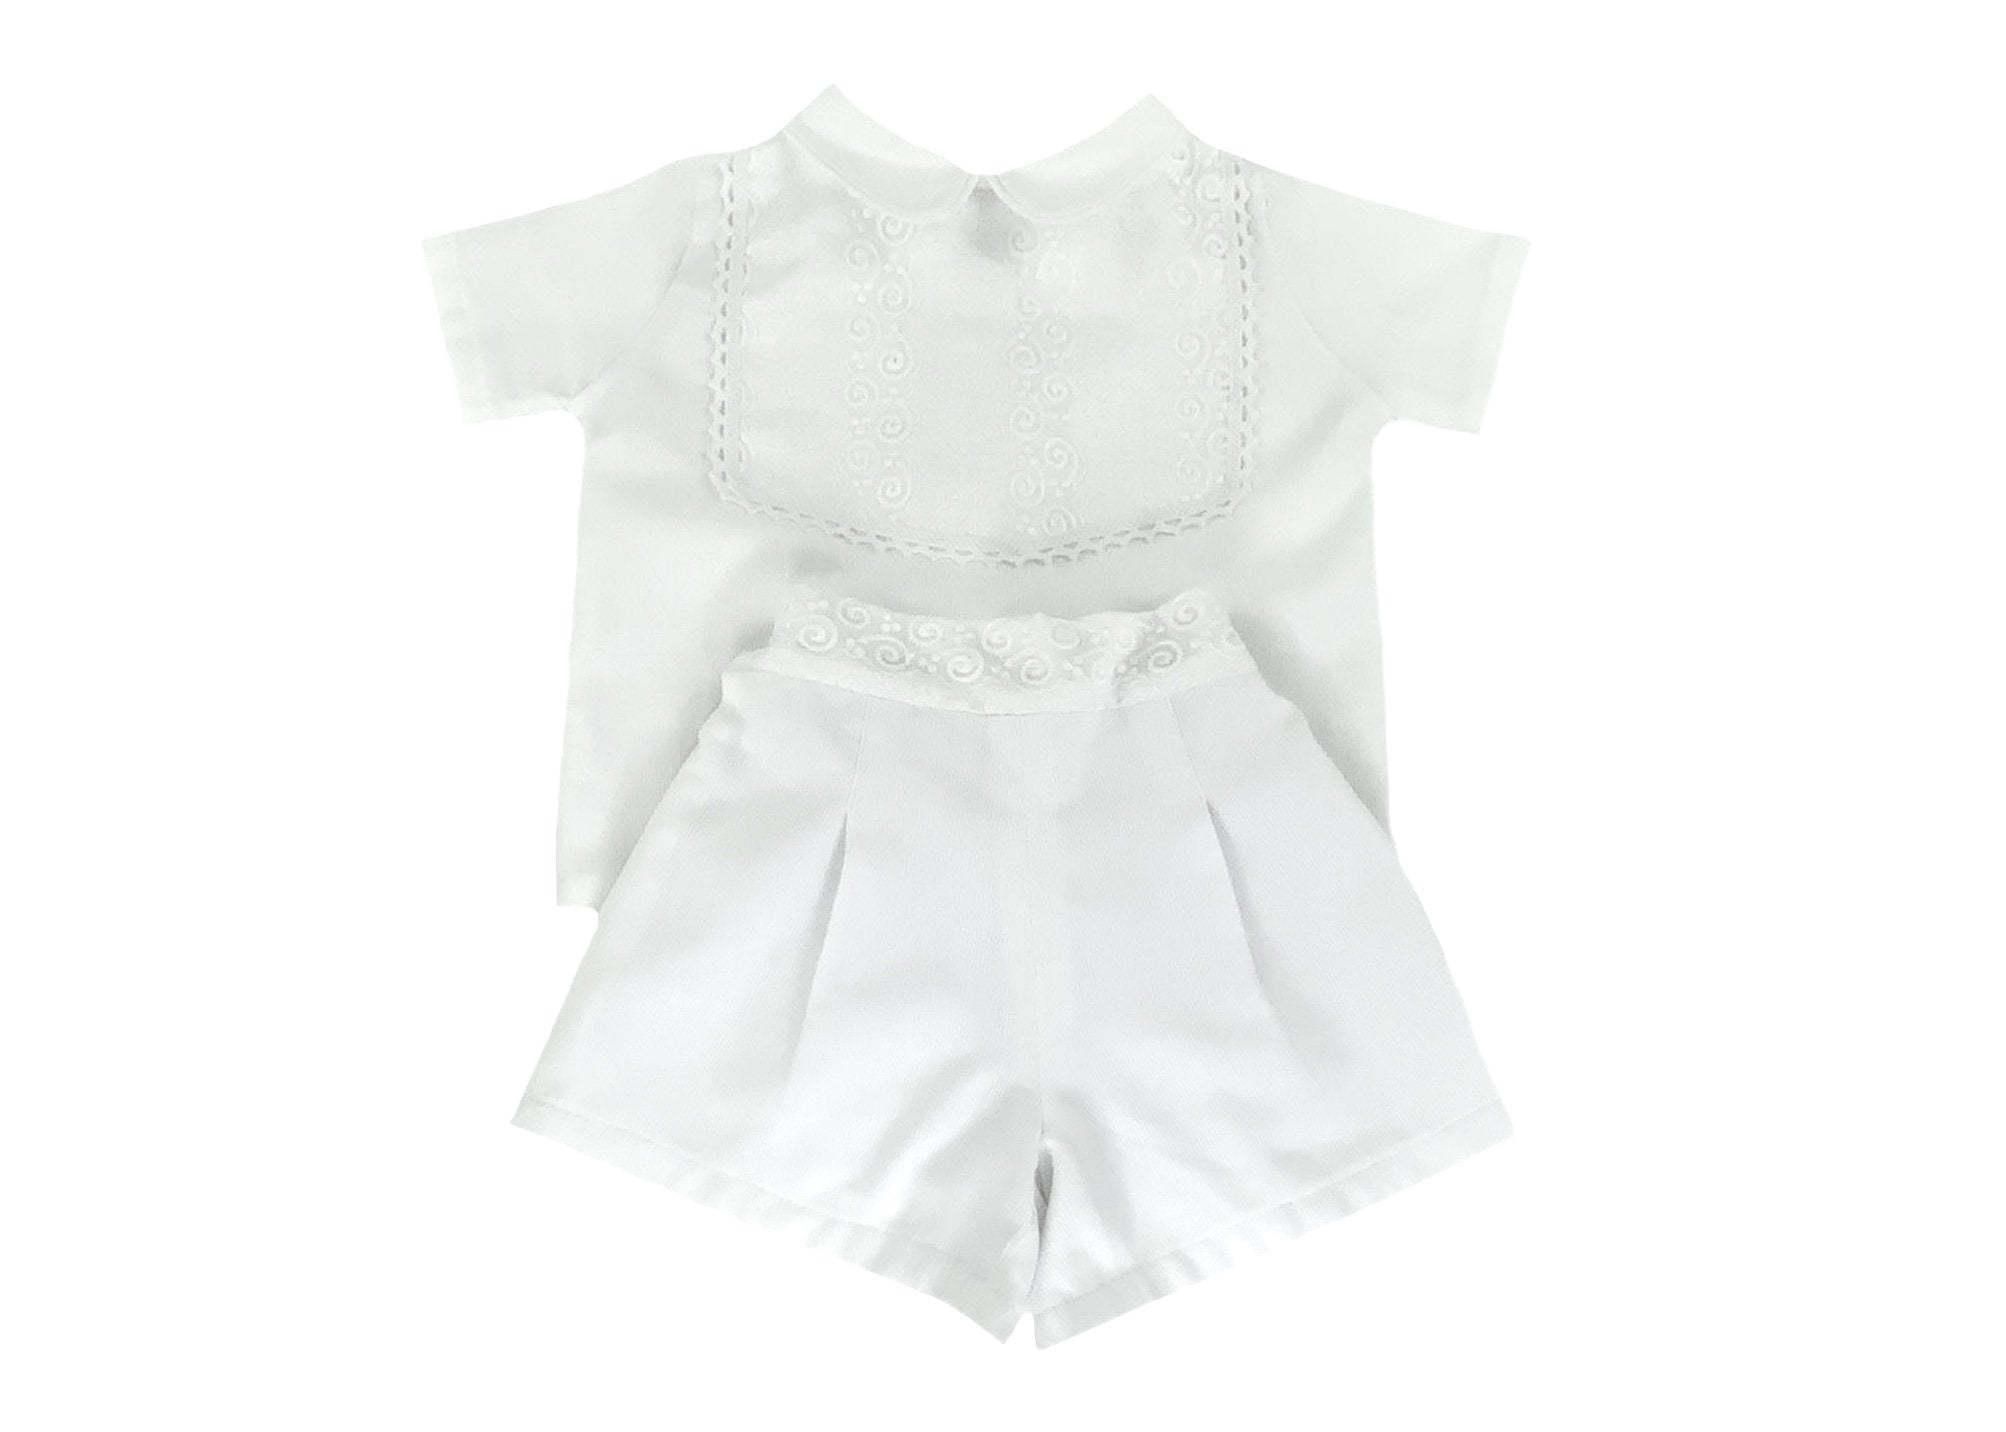 Embroidered White Cotton Boy's Top and Shorts Set-Boy's Clothing-Children's Clothing Store Shirt & Short Set Alfa Baby Boutique 0-3 White Male